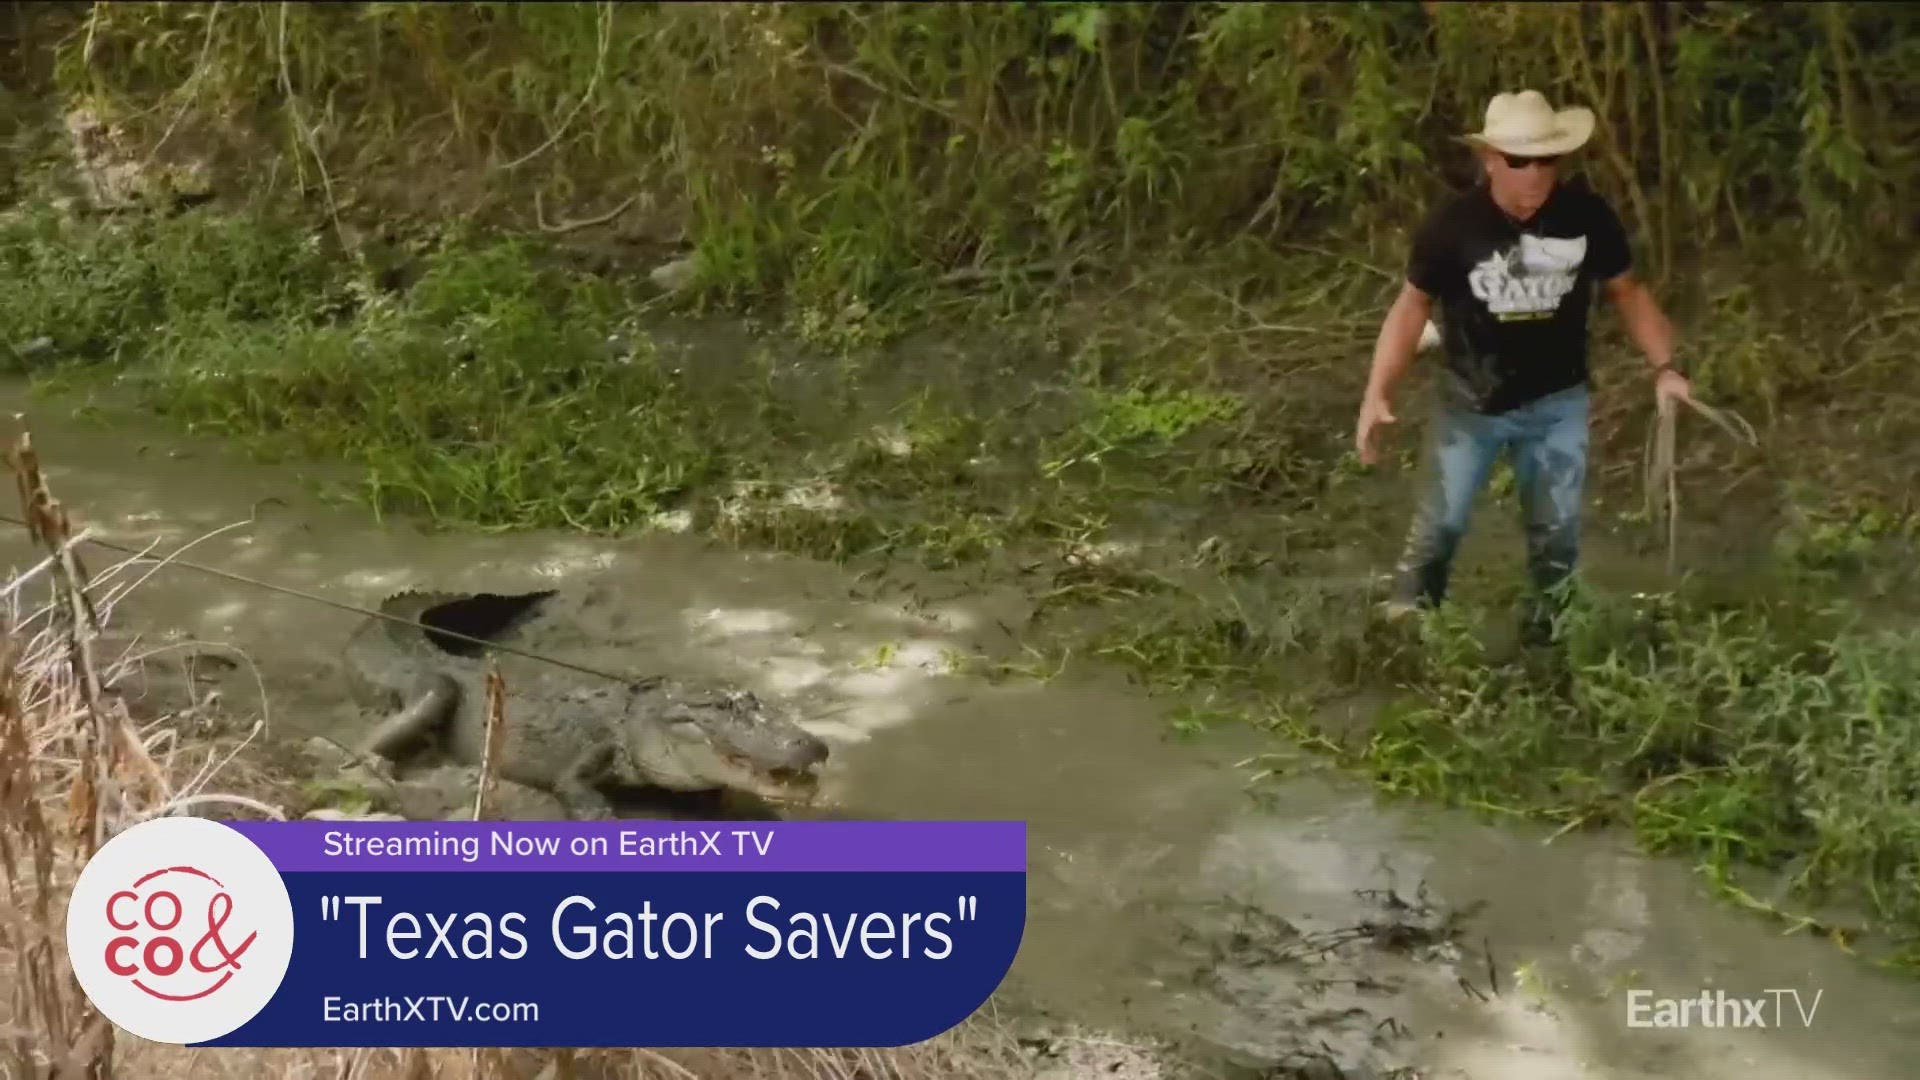 Catch the Texas Gator Savers on  EarthX TV and learn more at EarthXTV.com.